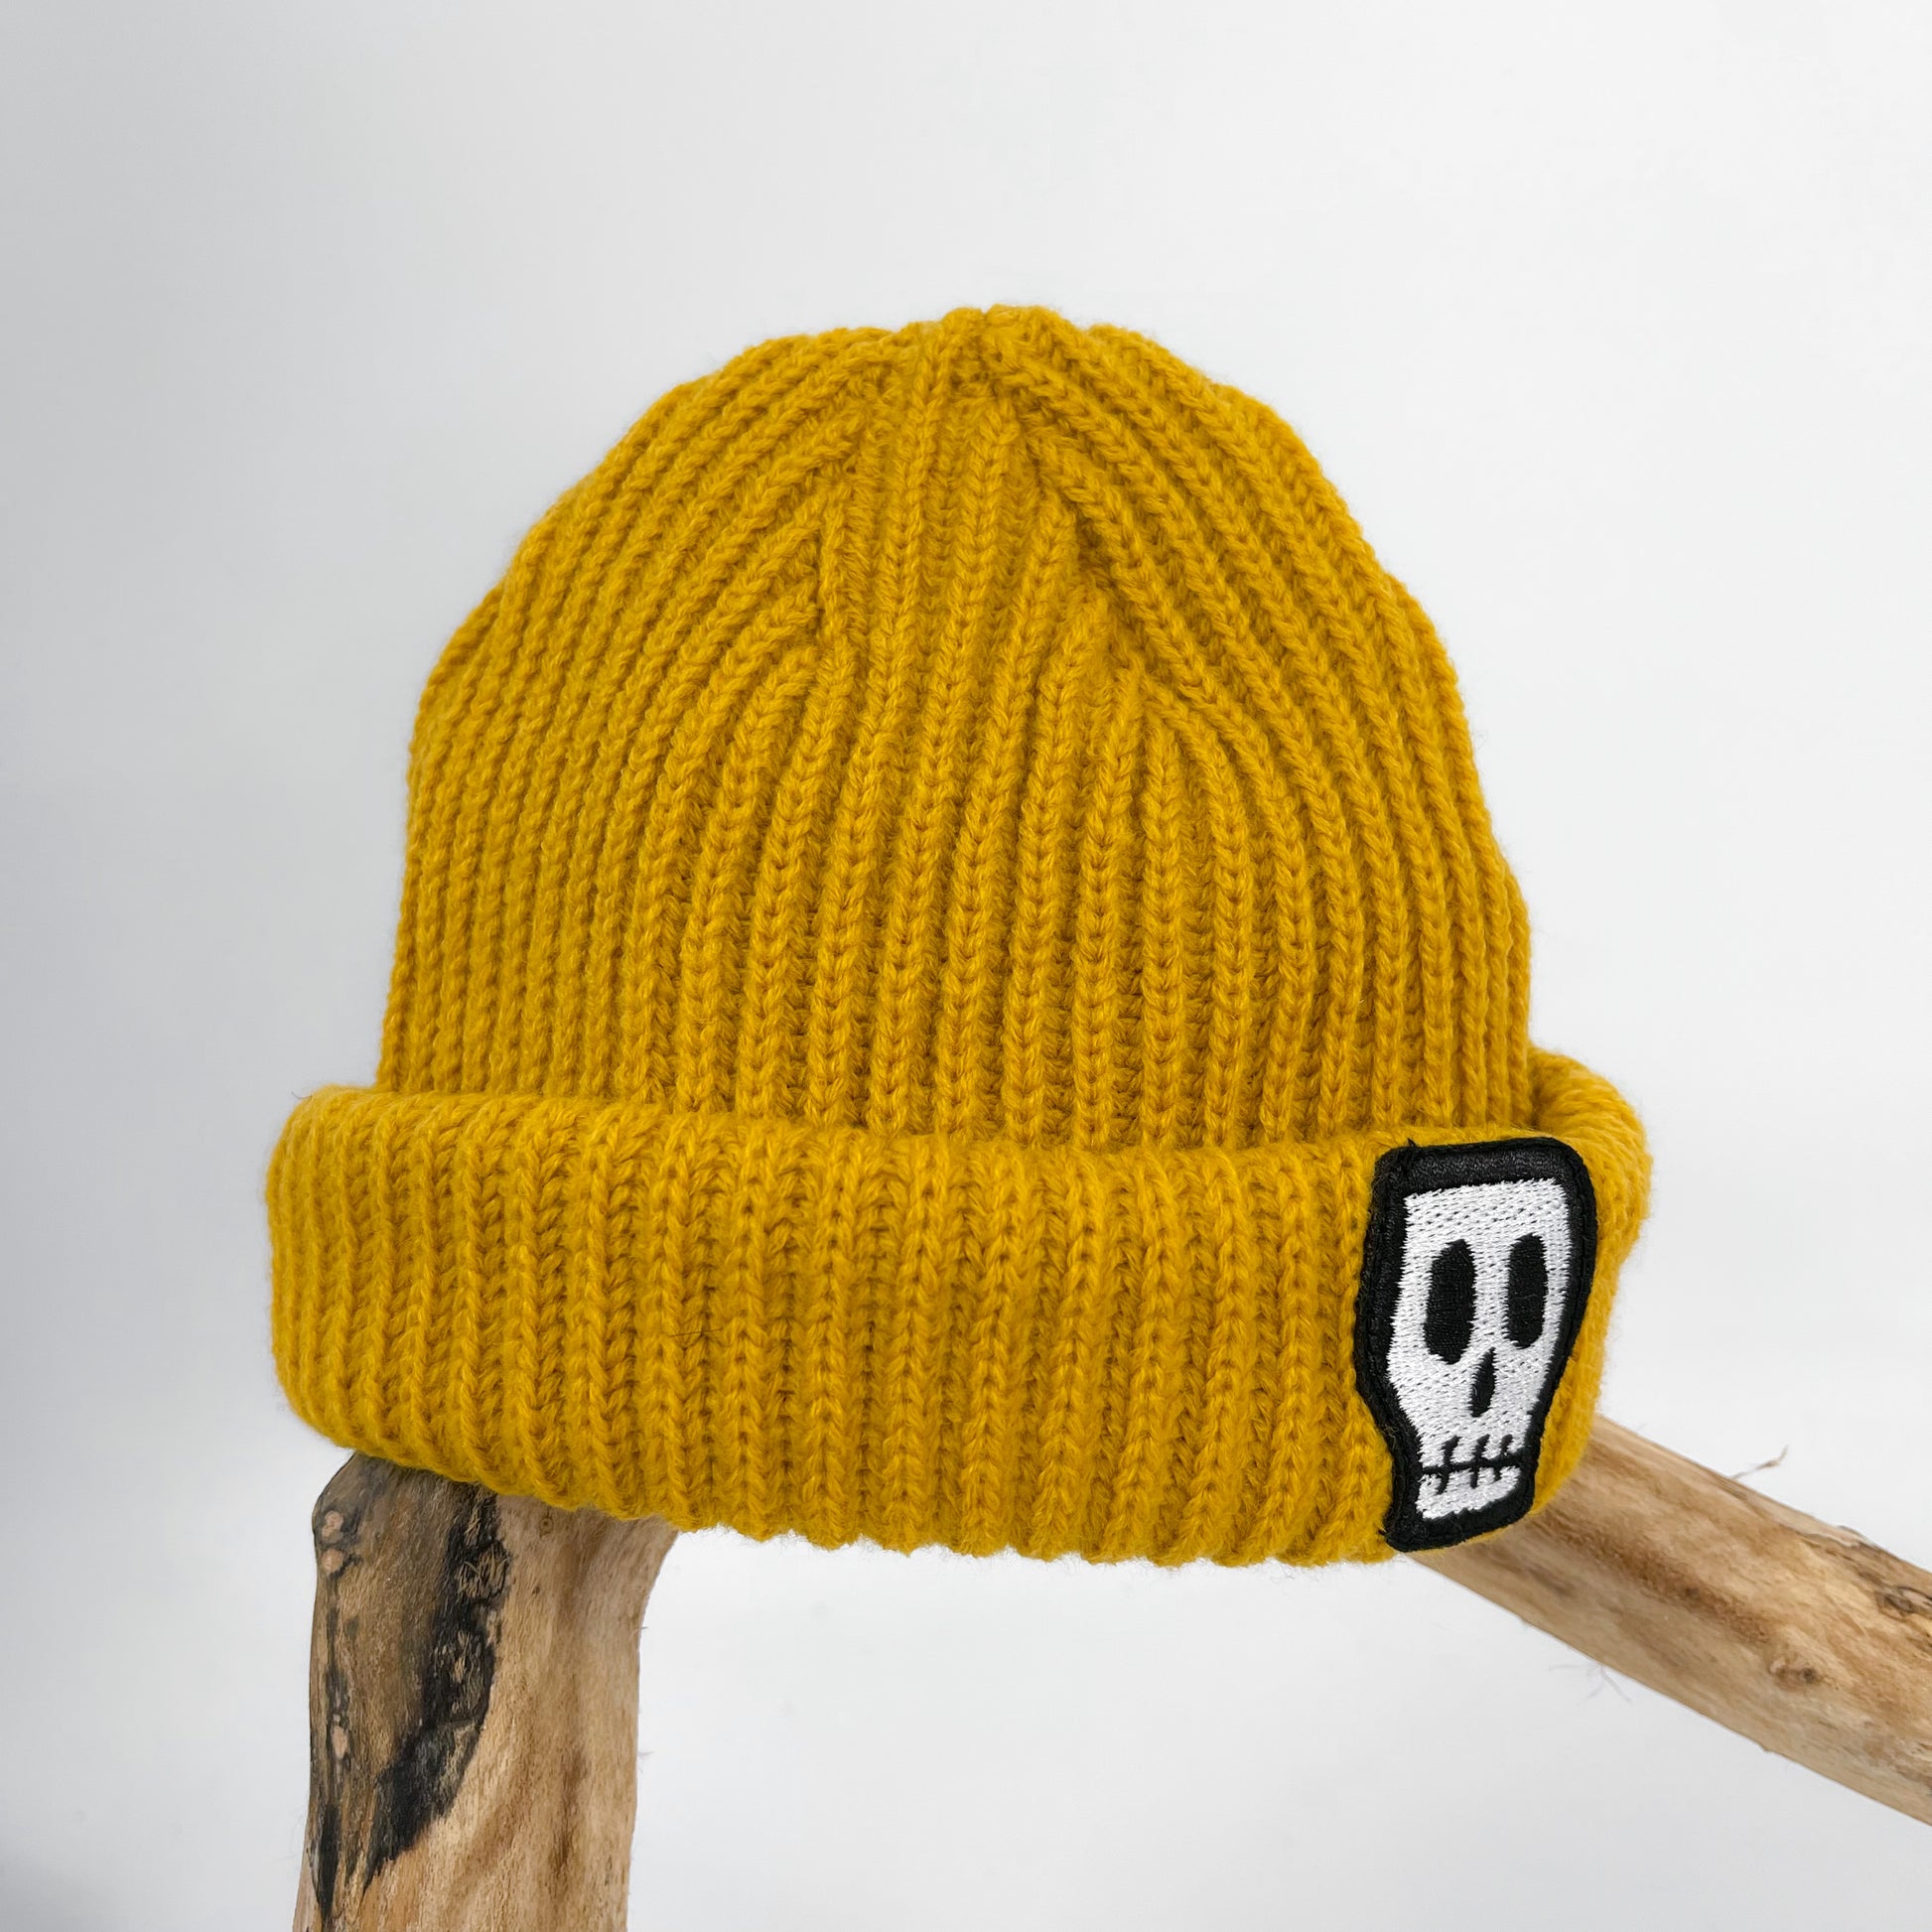 Kids trawler beanie, mustard yellow with embroidered Skelly Skull logo 